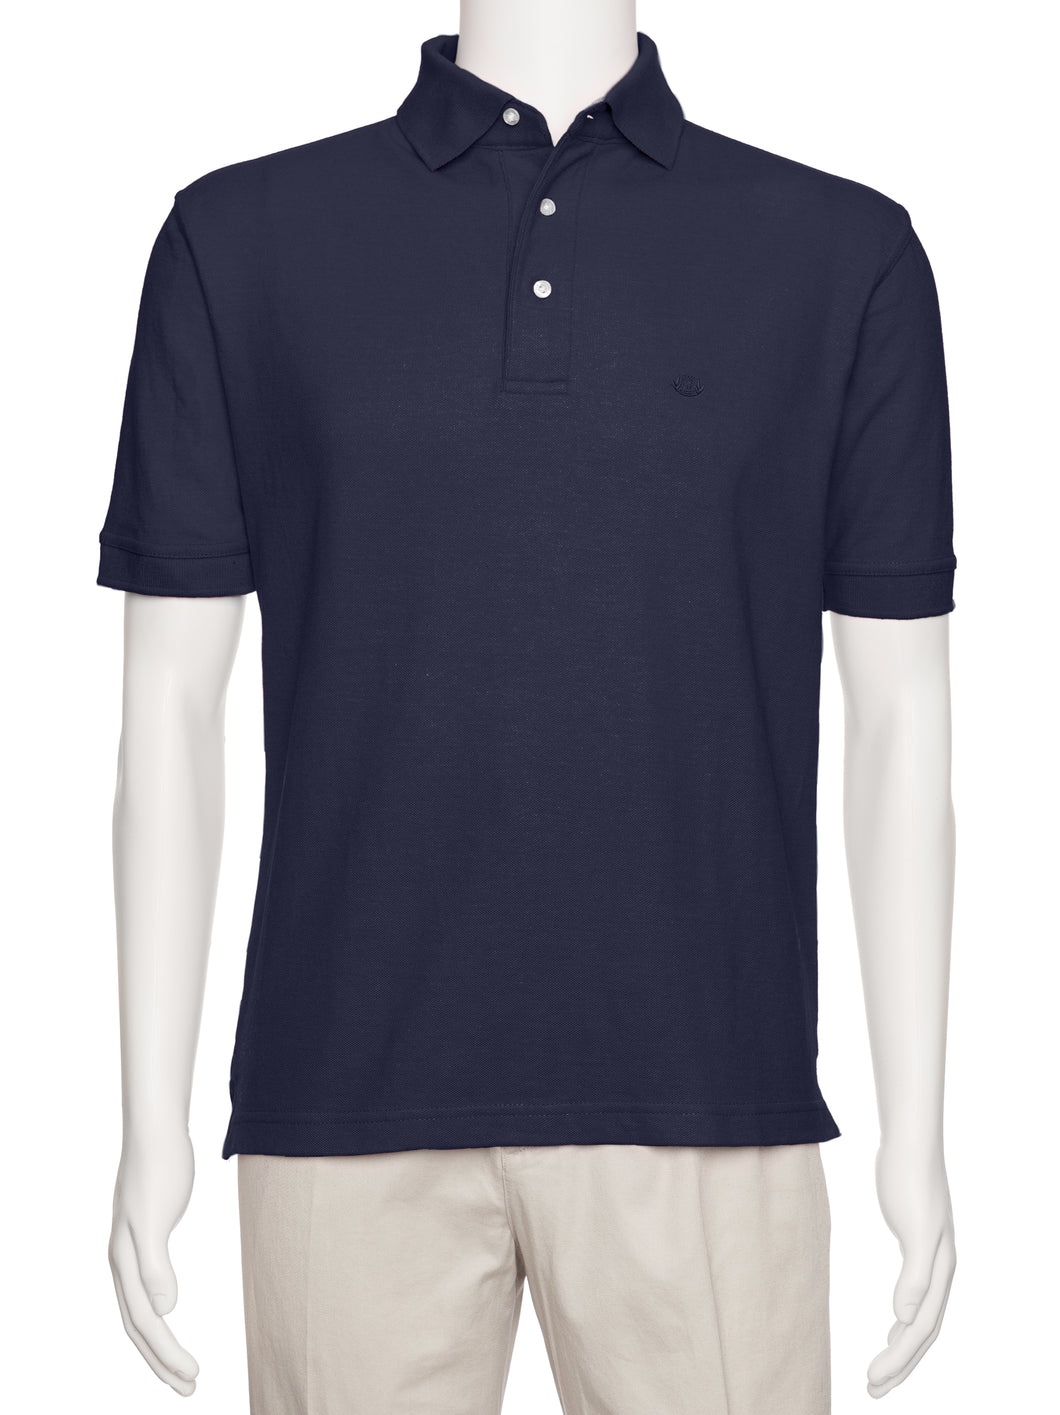 Men's Navy Solid Polo Shirt Classic Fit - Pique Chambray Collar